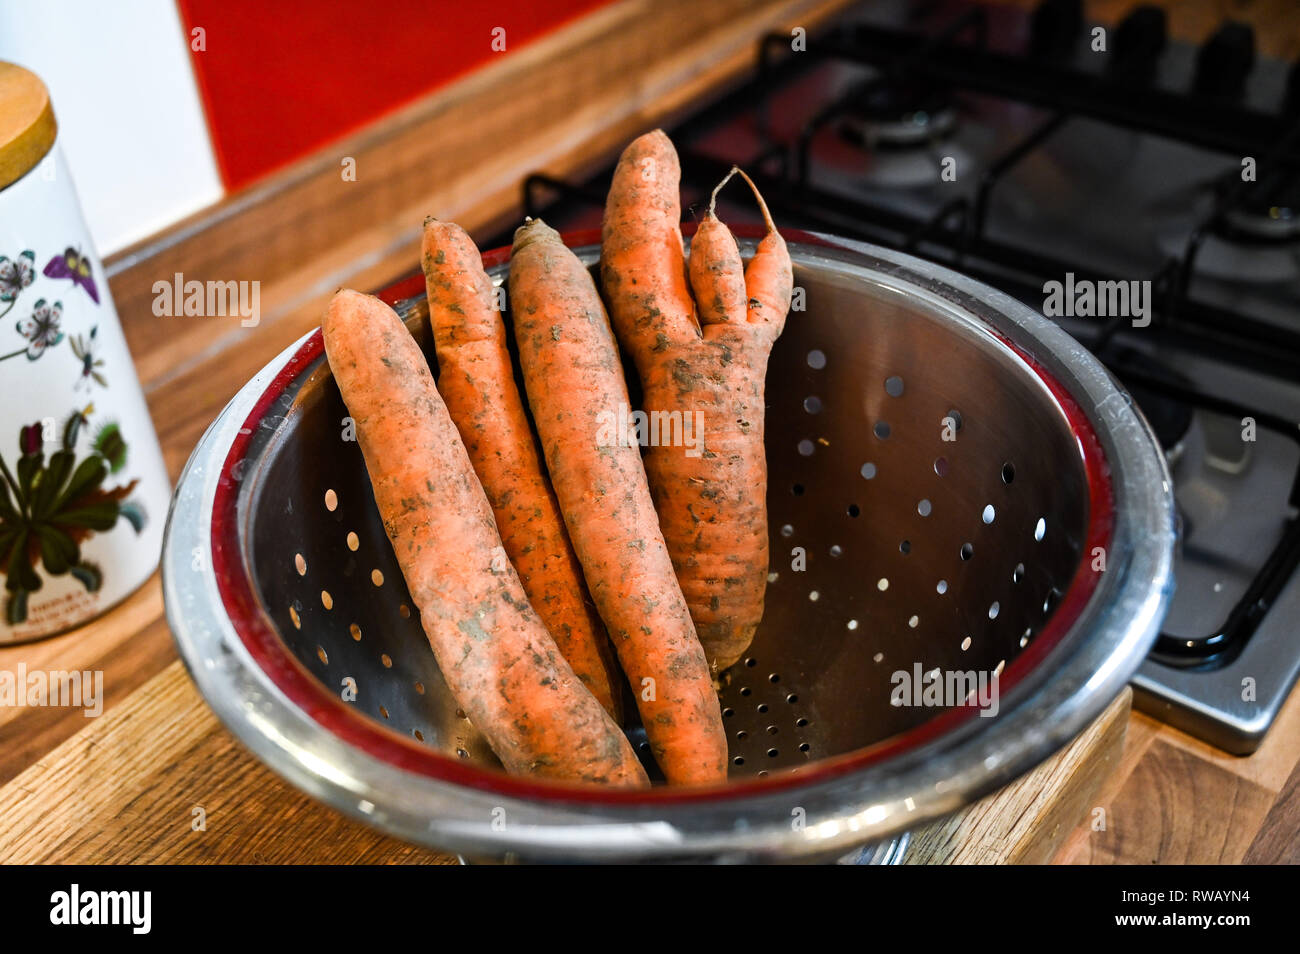 Freshly pulled carrots some in unusual shapes with earth and mud being washed in kitchen sink in a colander Stock Photo